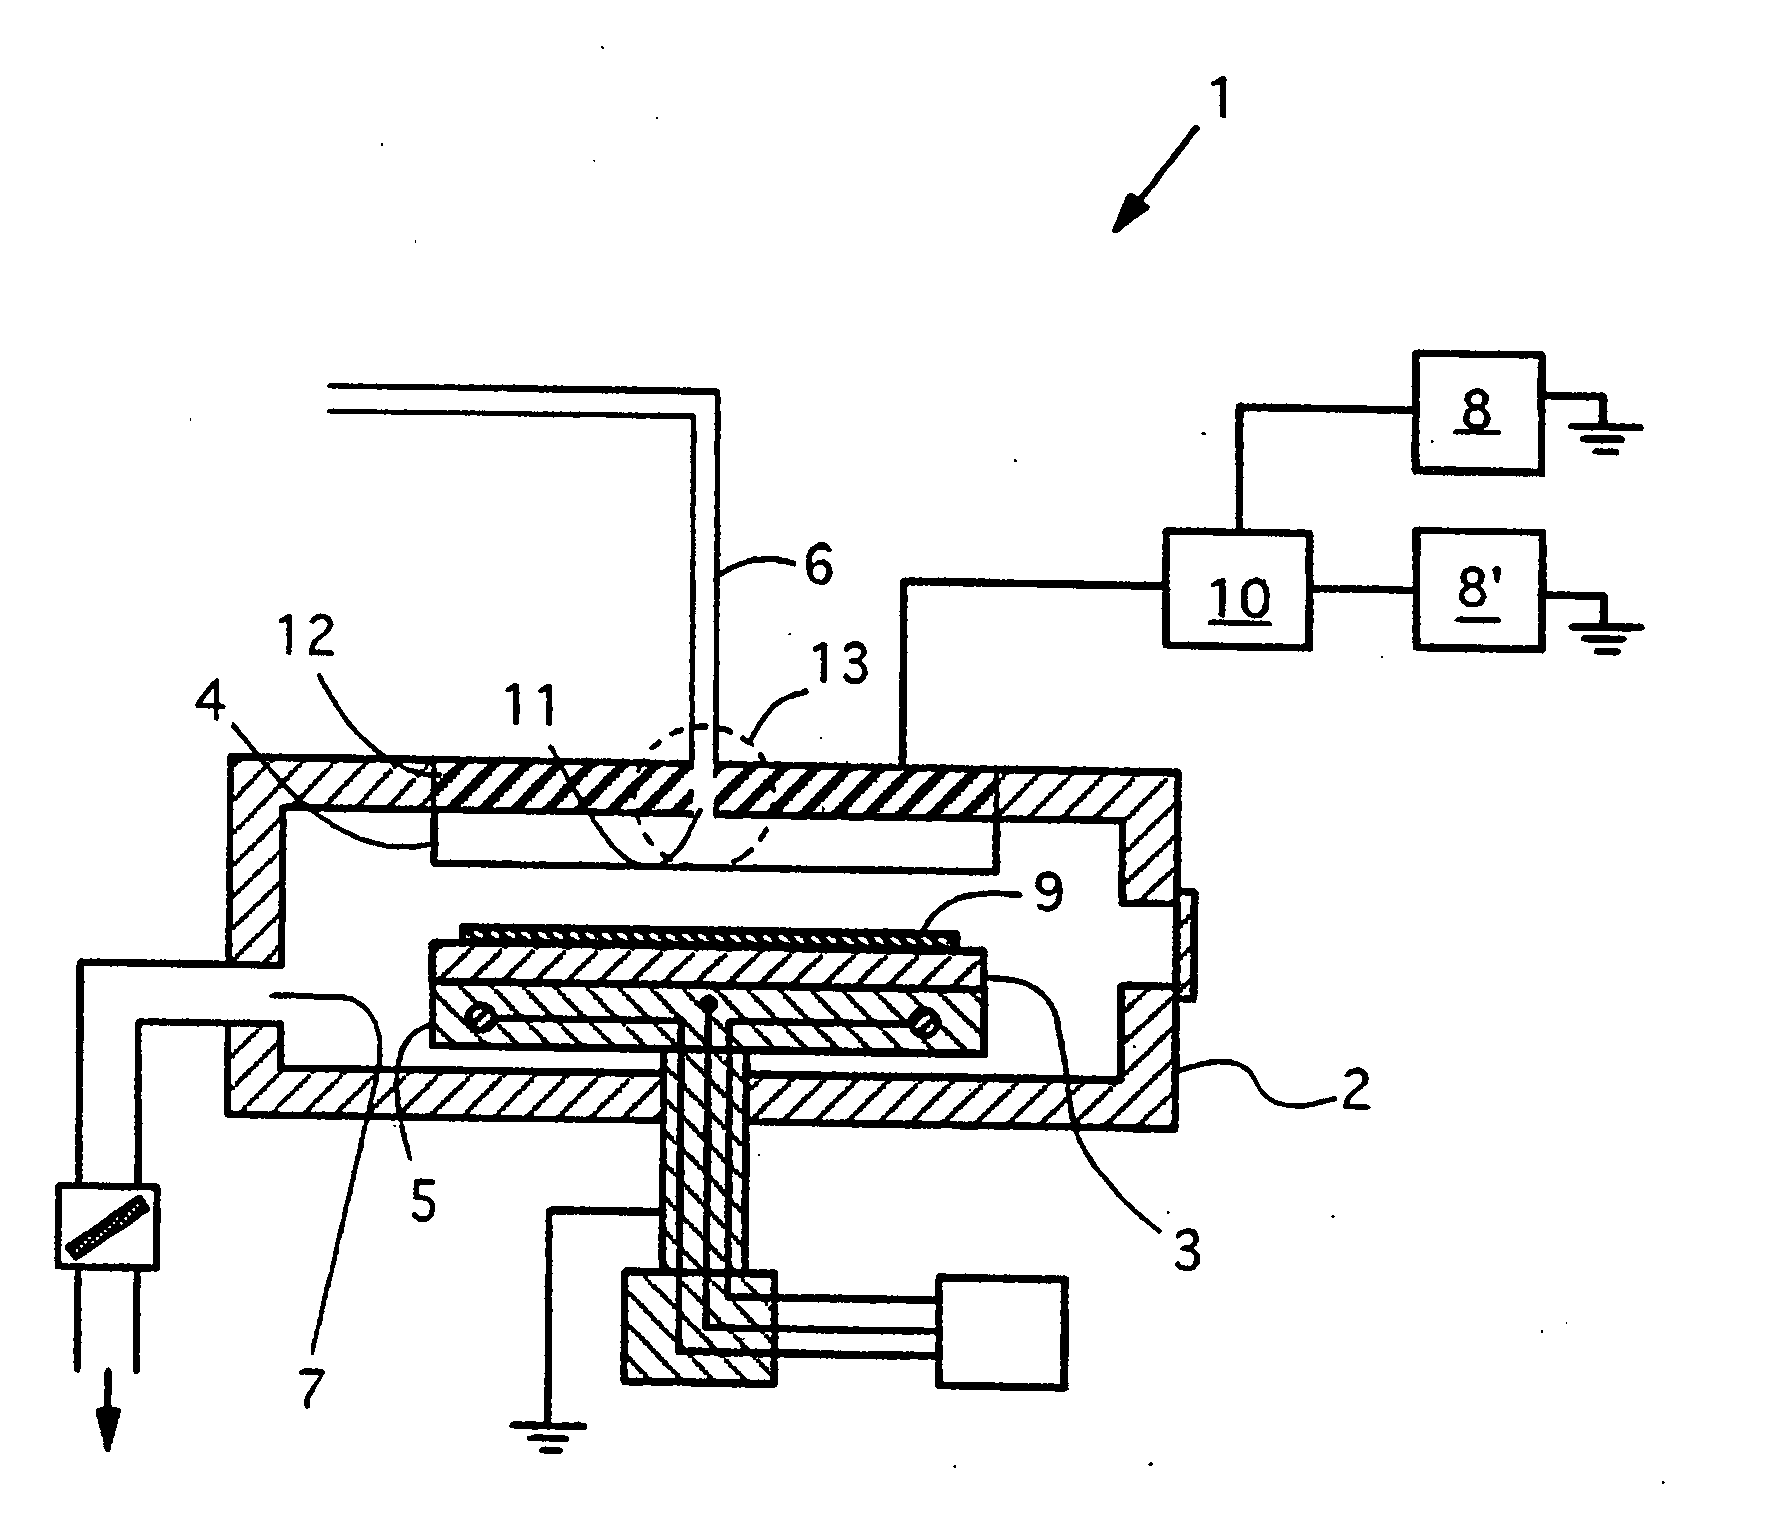 Plasma processing apparatus with insulated gas inlet pore